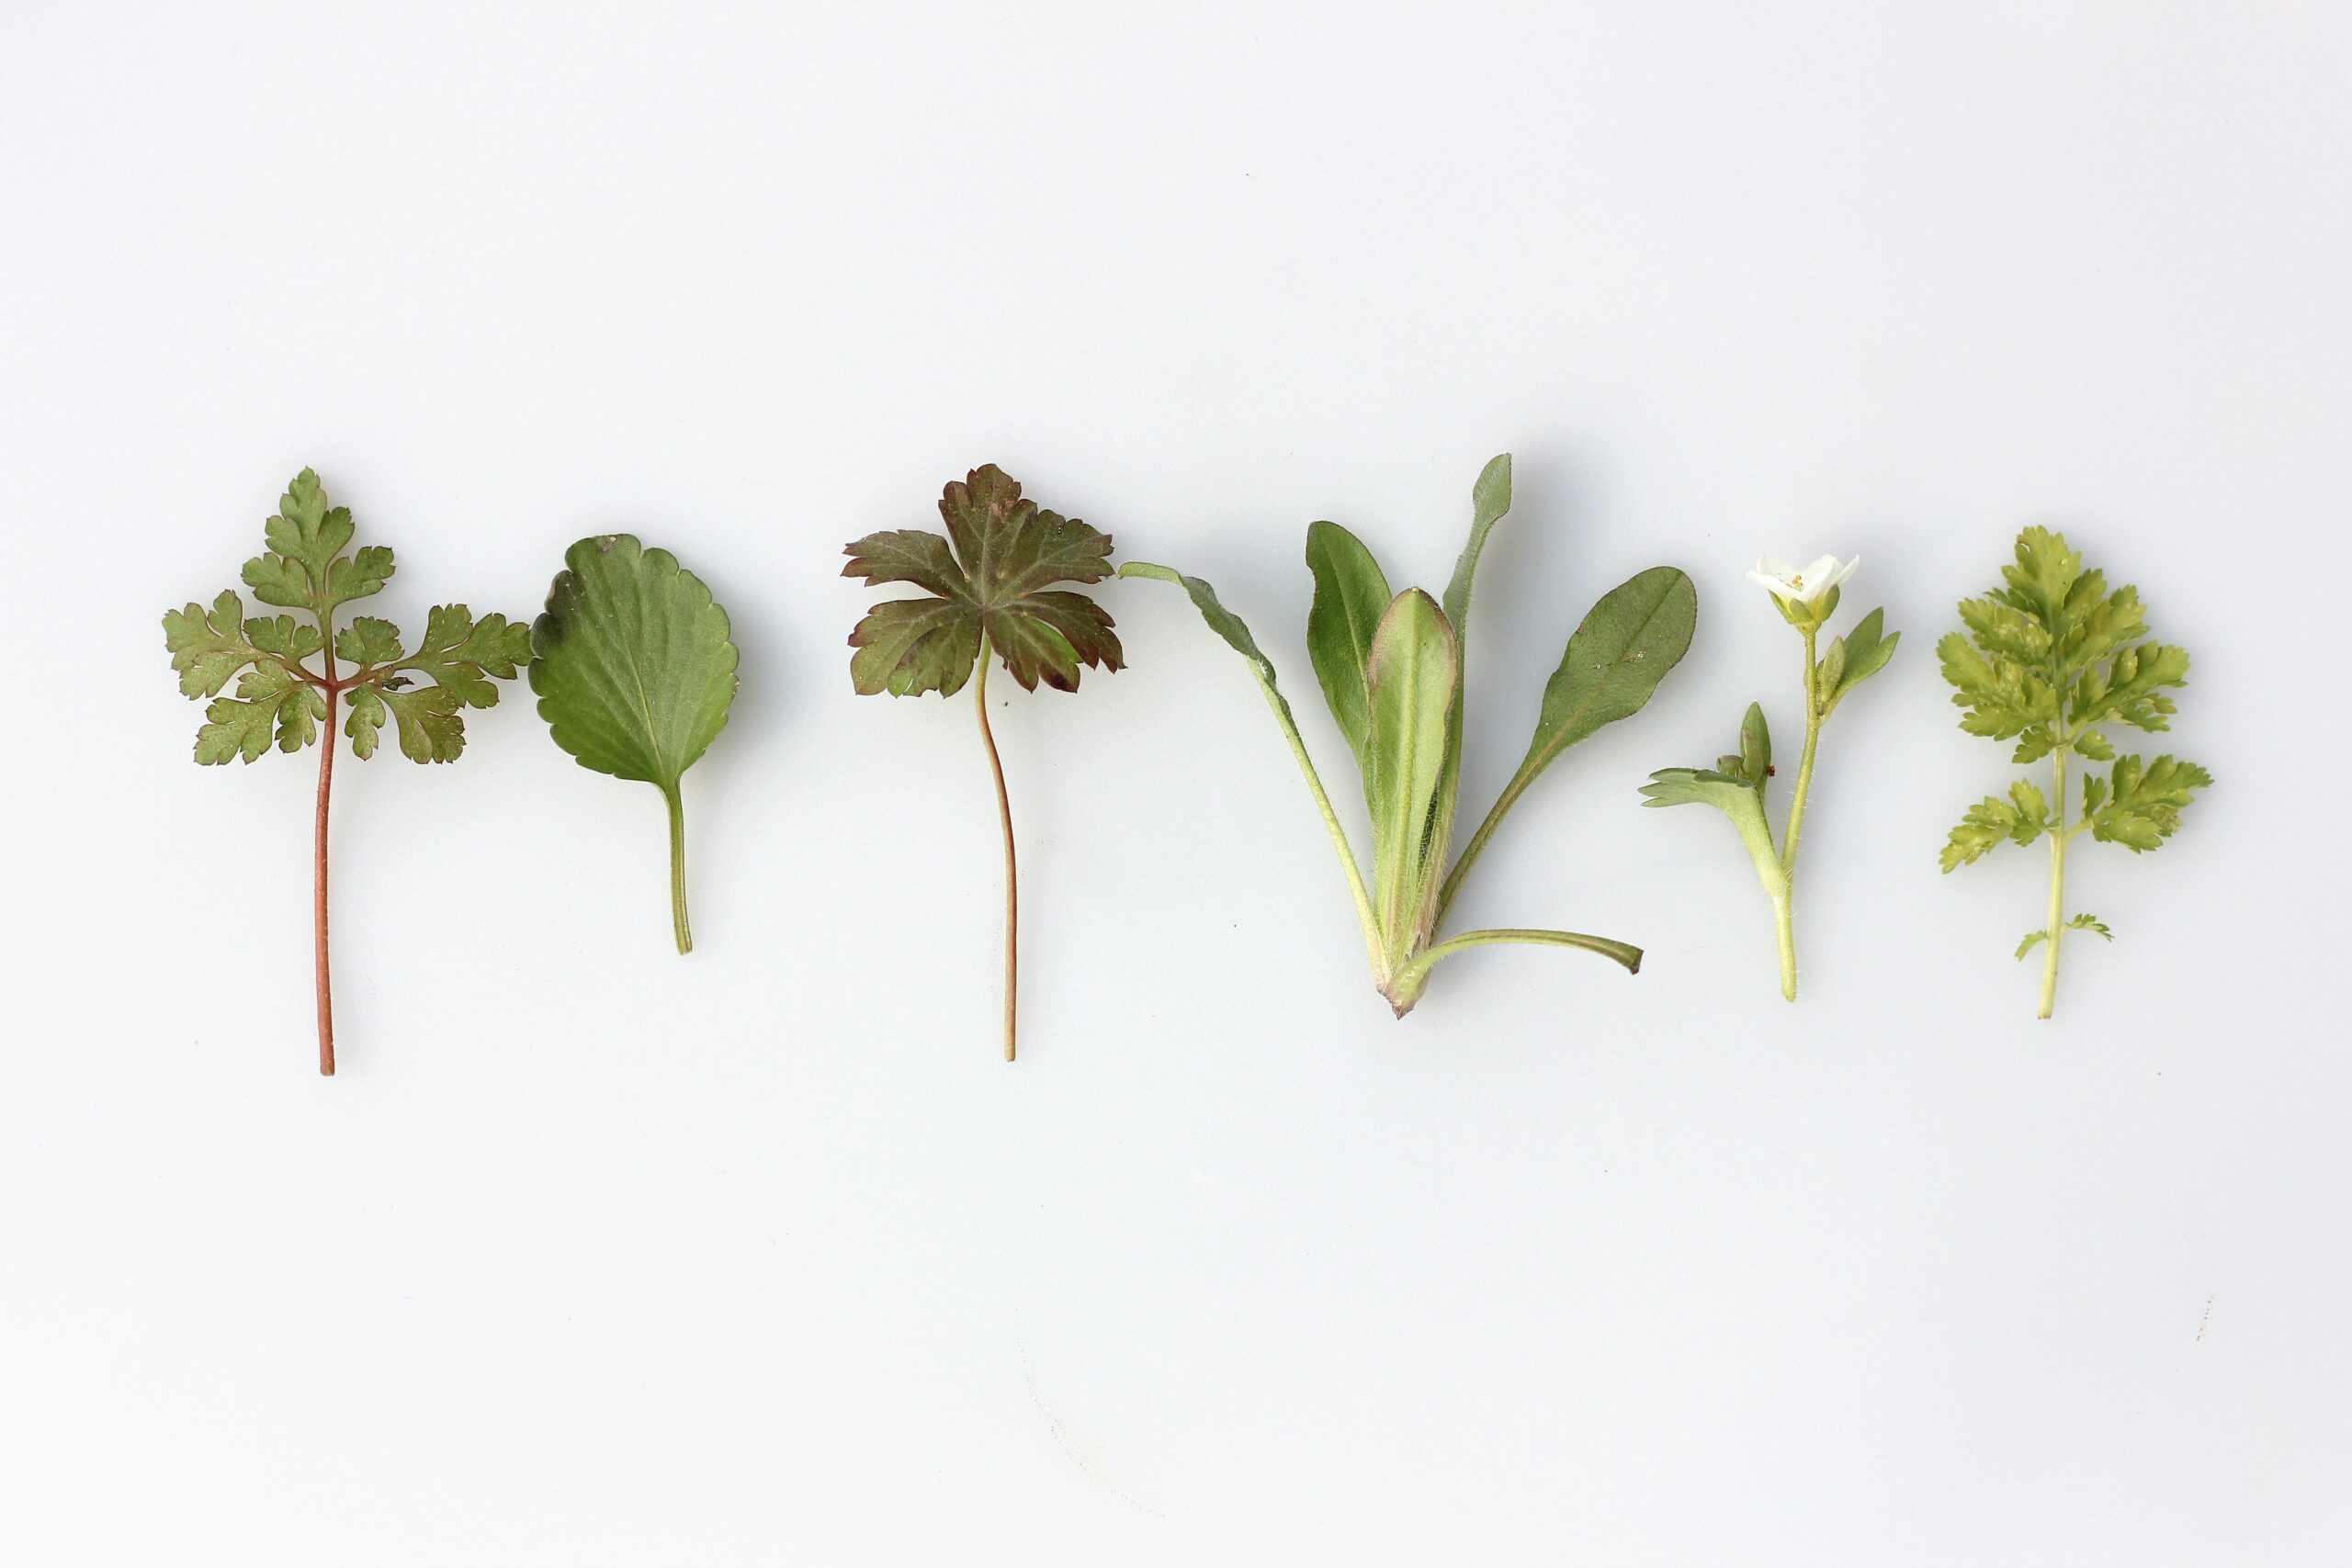 6 sprigs of green plants against white background. They are all different types of plants.